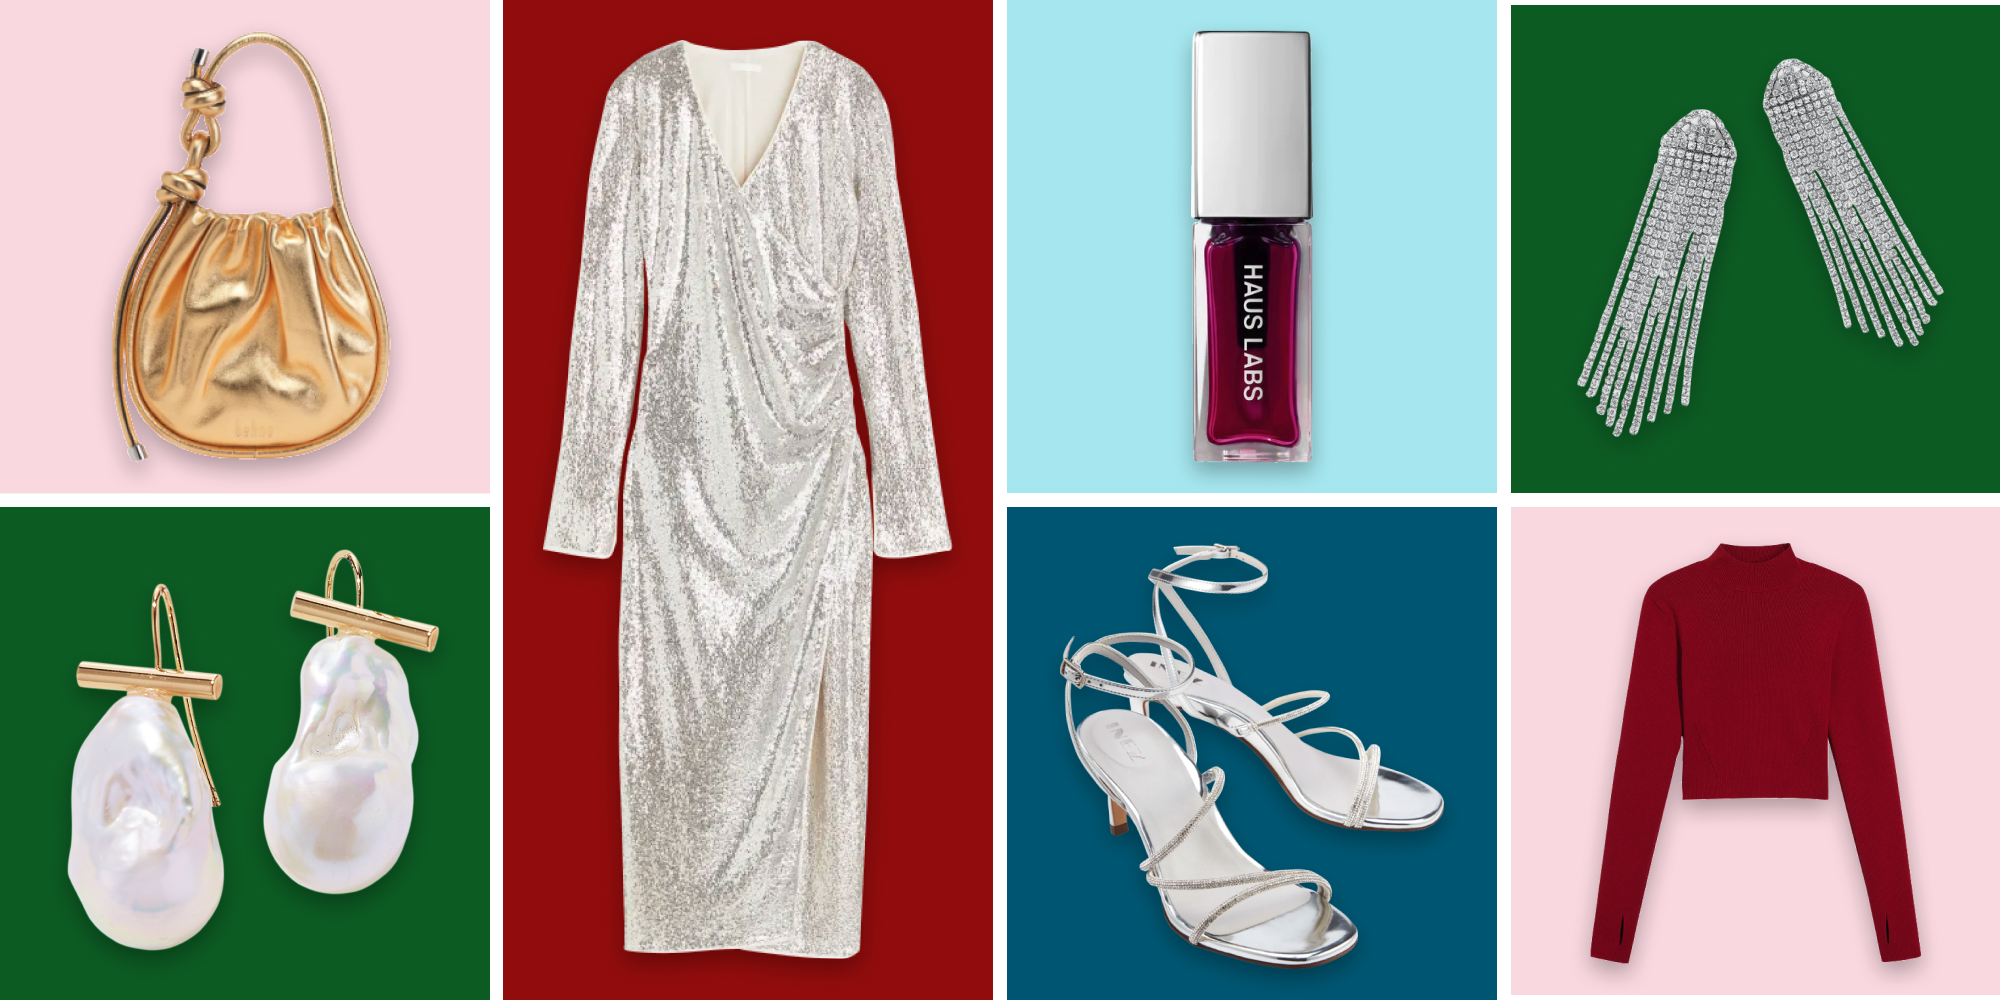 7 Classy Ideas to make your Sequin Outfits Christmas Party Ready